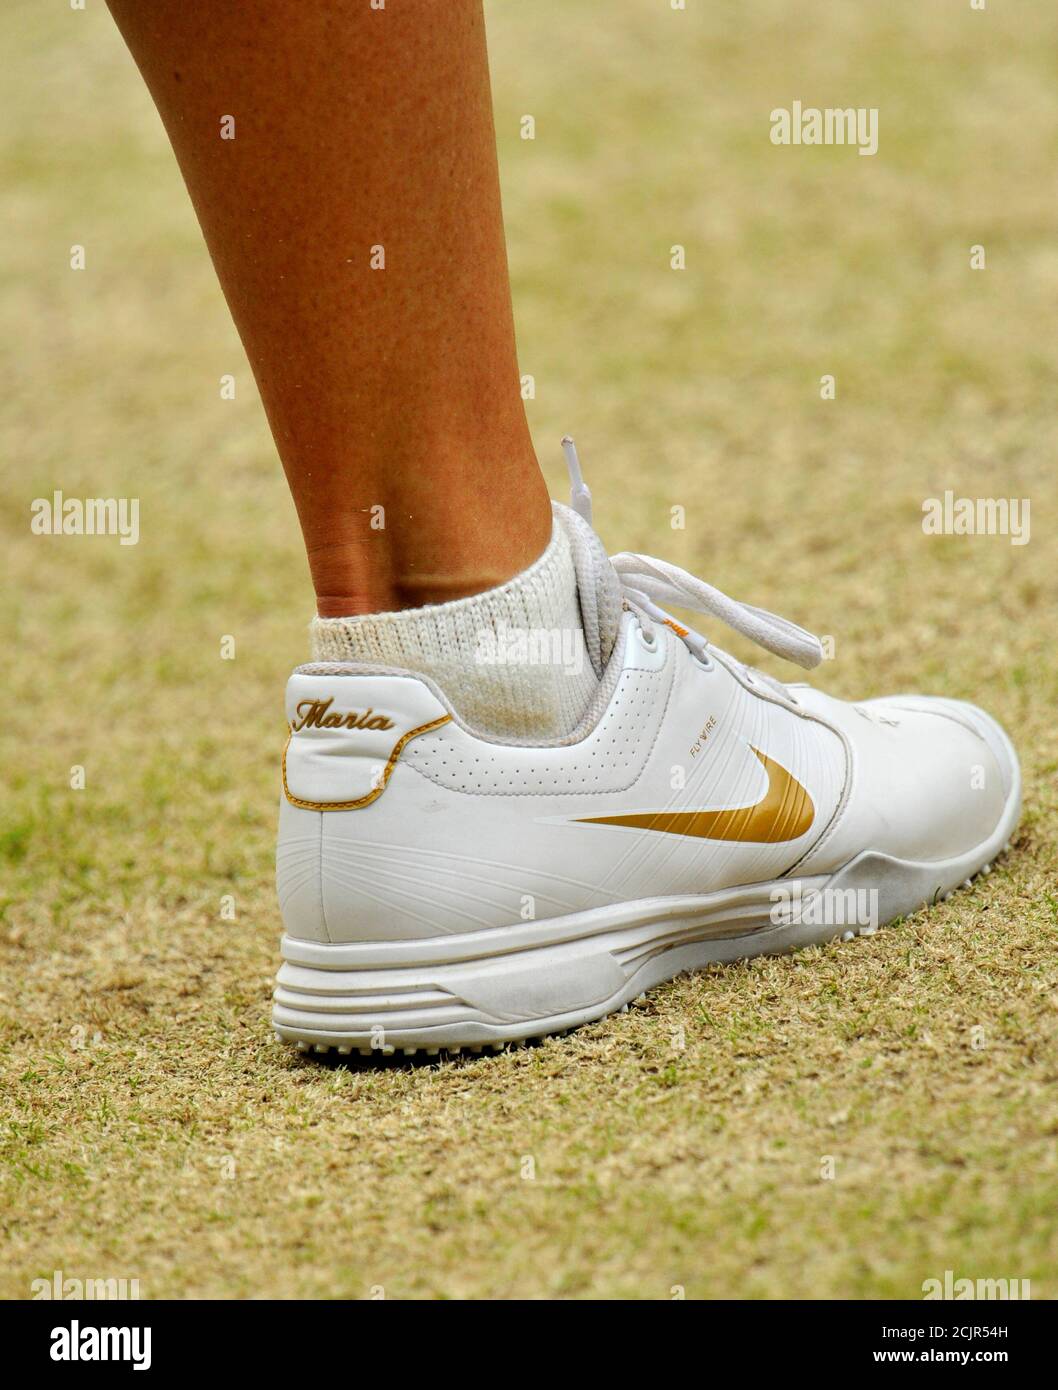 The shoe of Maria Sharapova of Russia is seen during her final match  against Petra Kvitova of the Czech Republic at the Wimbledon tennis  championships in London July 2, 2011. REUTERS/Toby Melville (